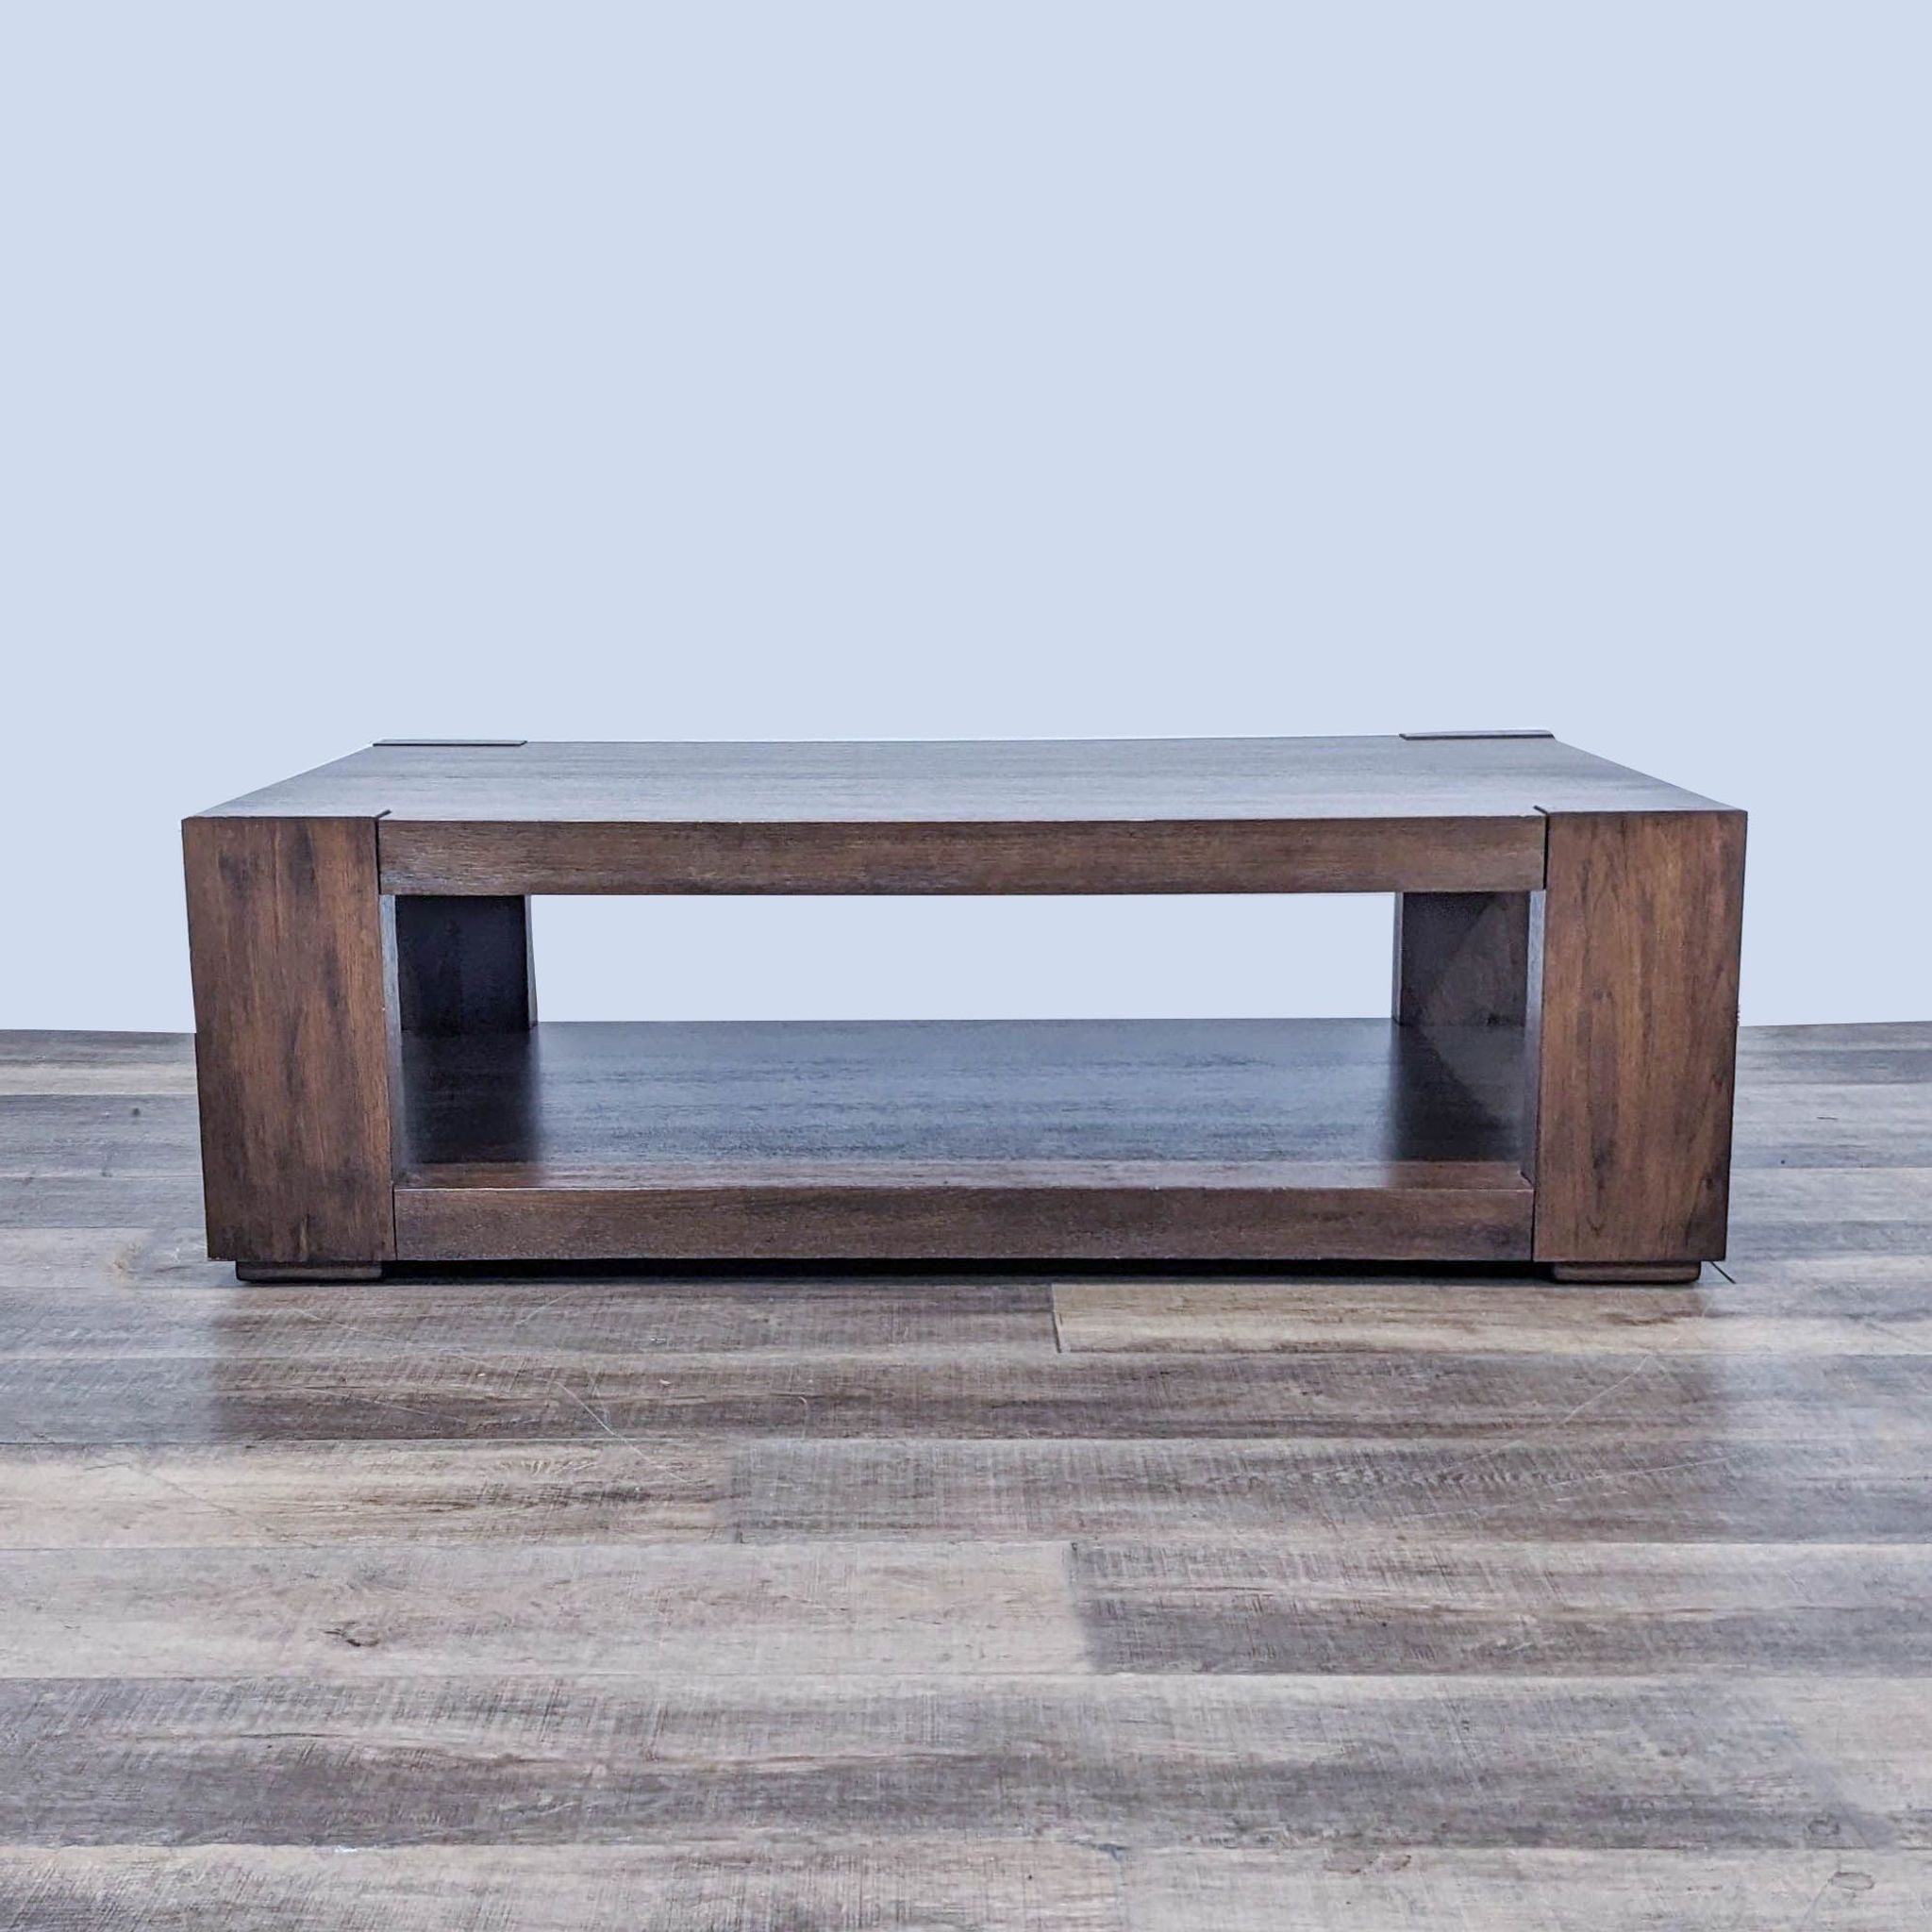 Crate & Barrel coffee table with hand-planed, wire-brushed walnut veneer surface, on hardwood floor.